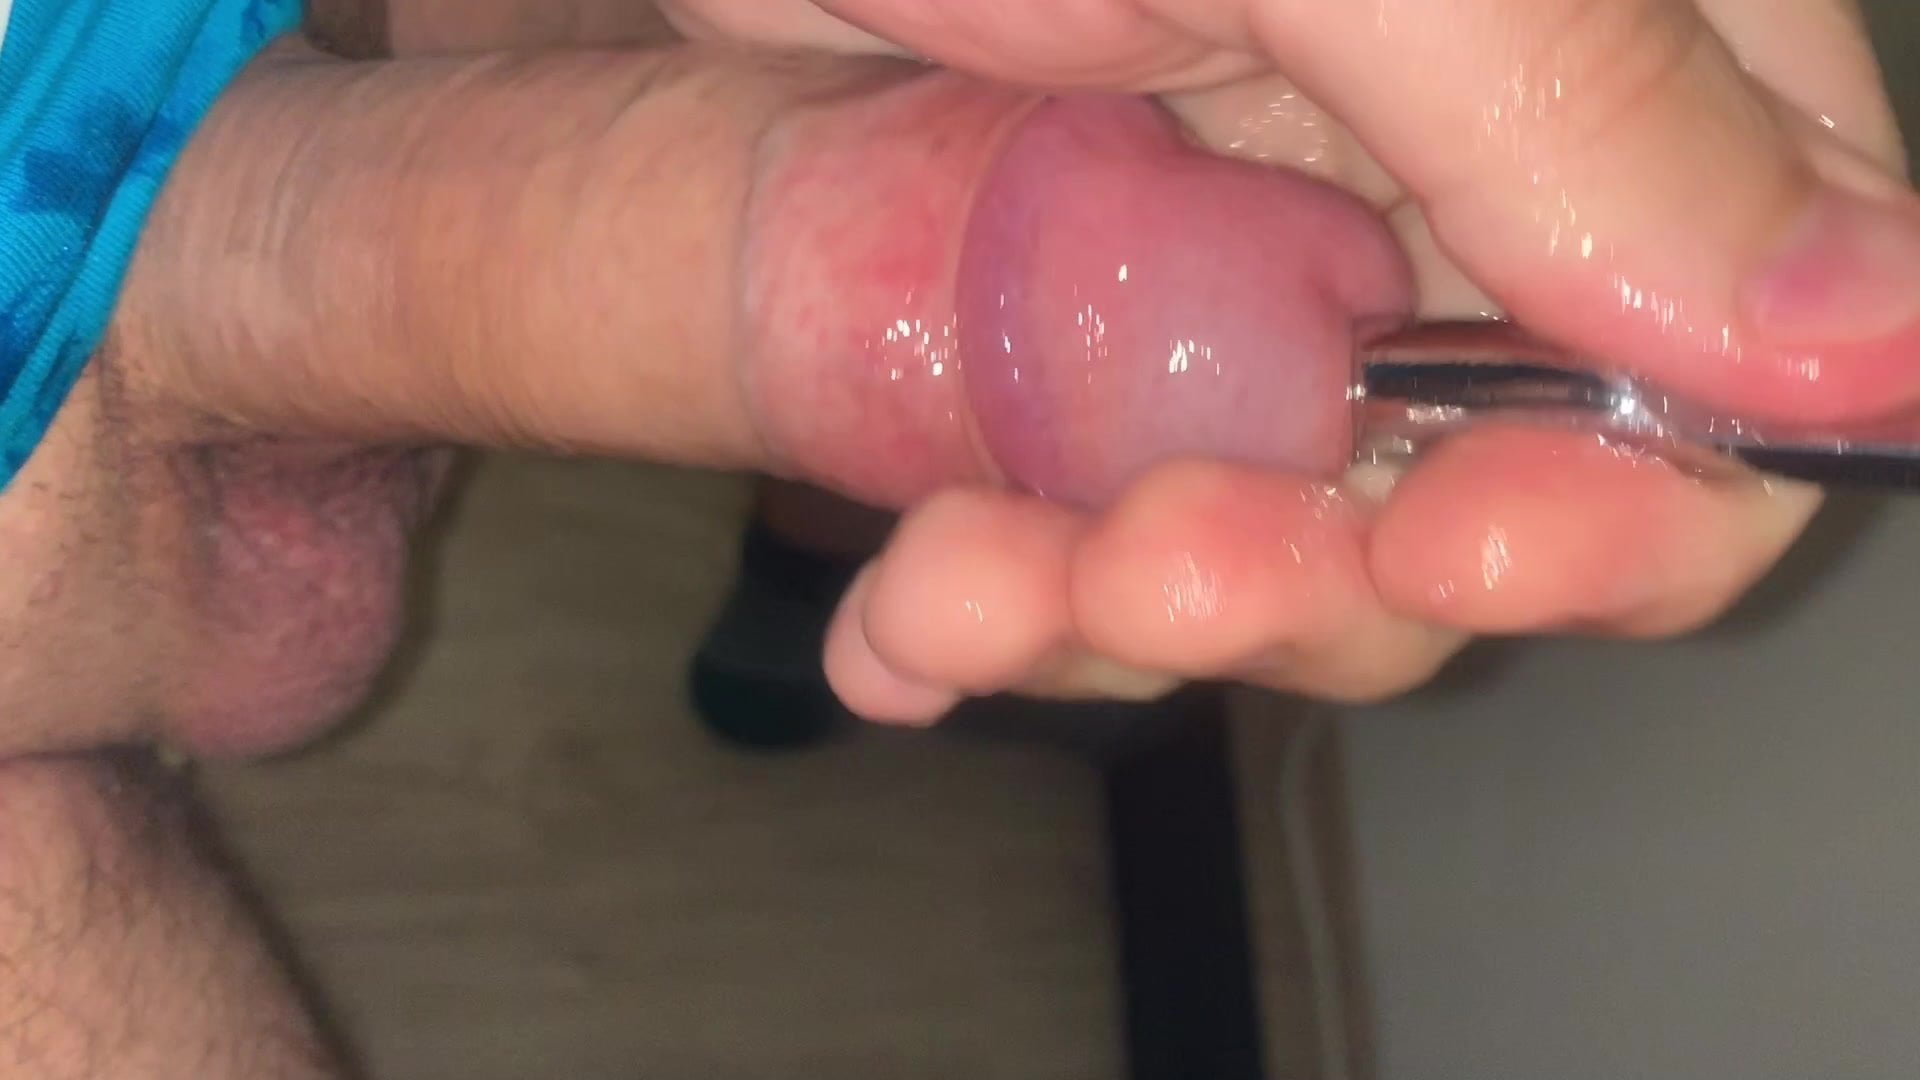 Sounding Urethra Insertion With Anal Toy In While Jerking Cock Cumshot Fini